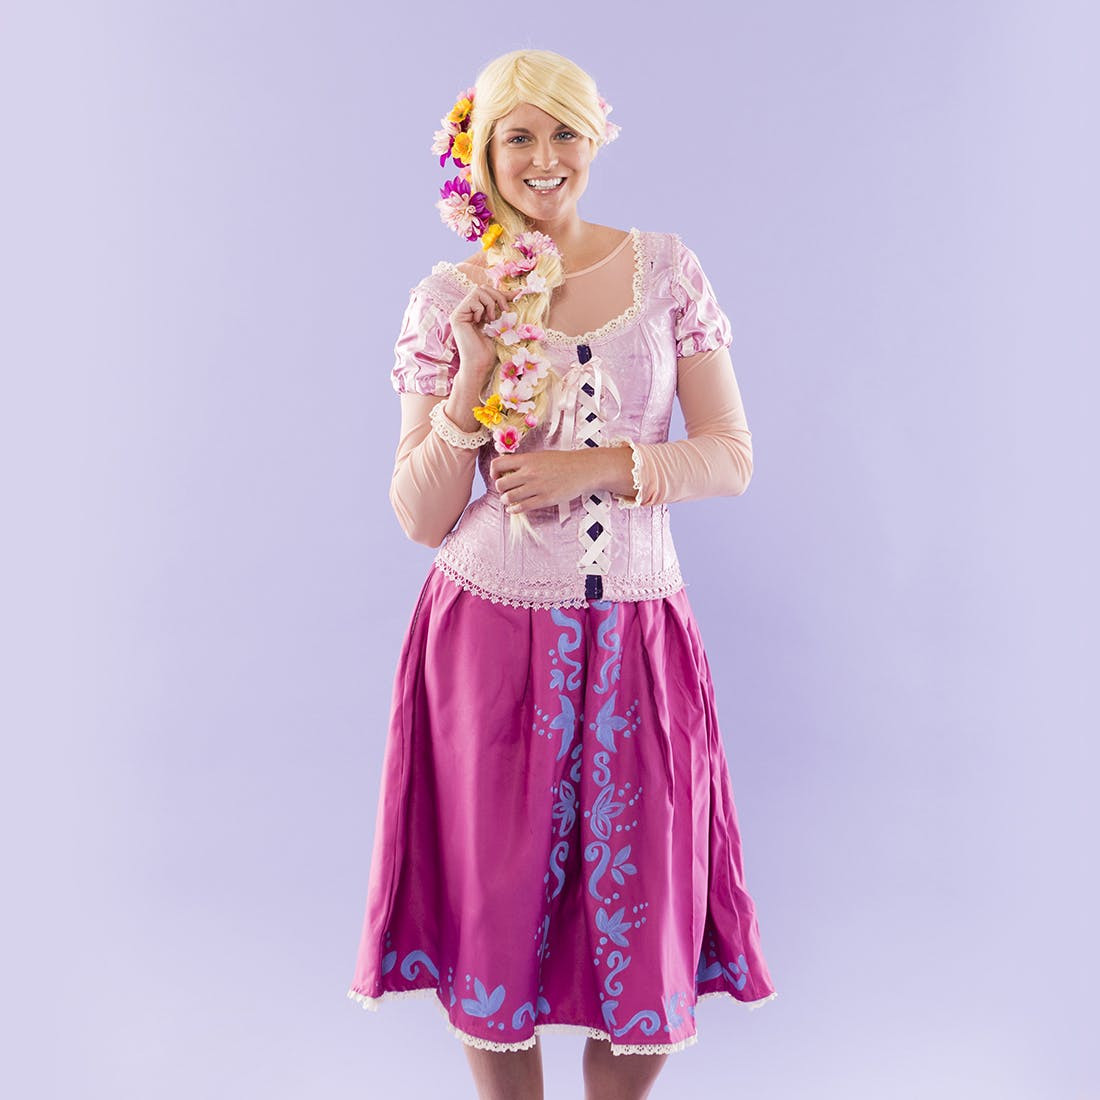 Rapunzel Costume DIY
 Bring Out Your Inner Disney Princess With This DIY